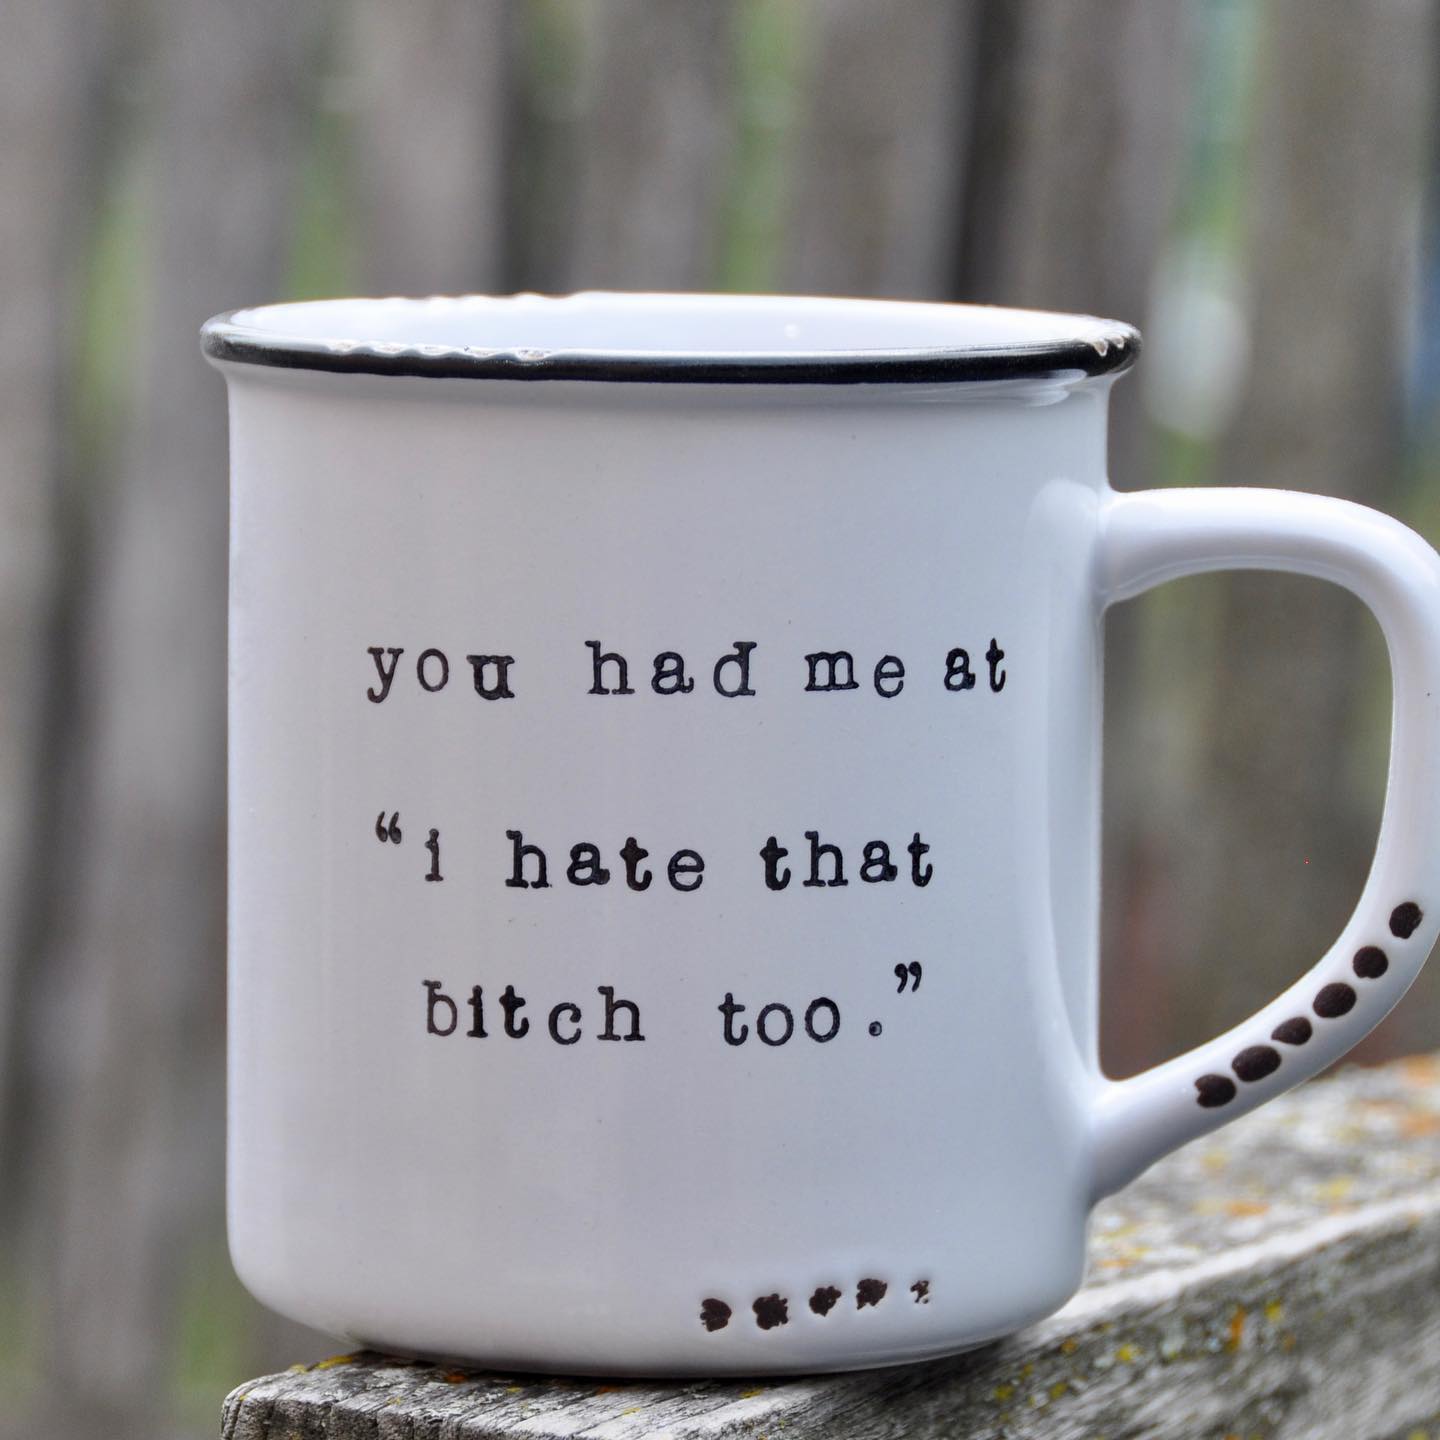 You had me at "i hate that bitch too."